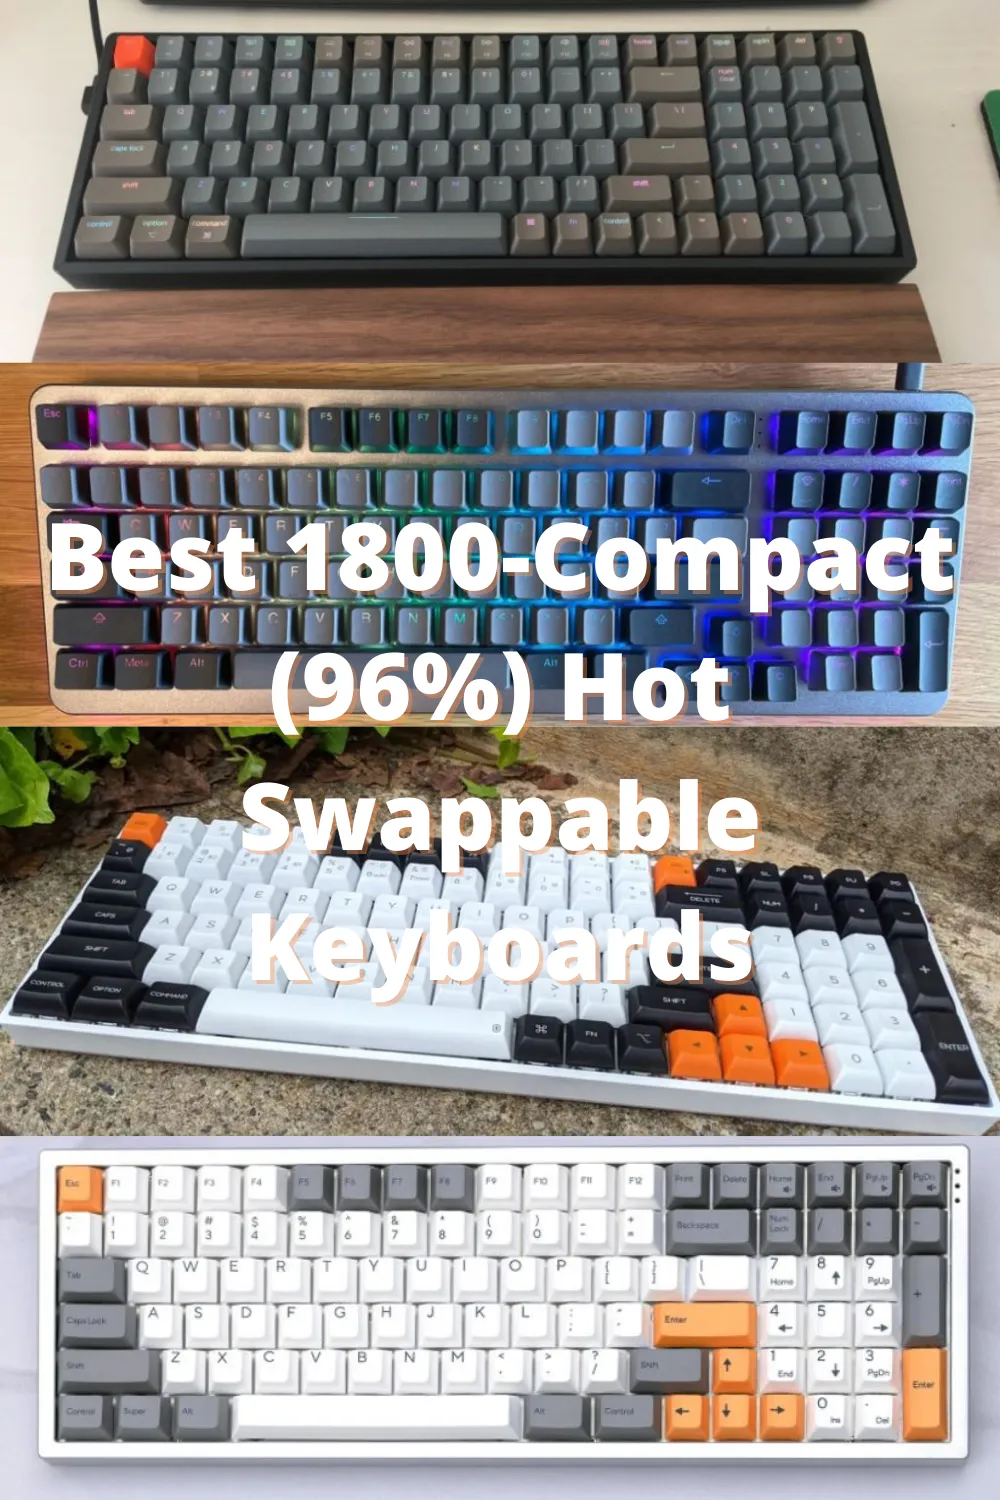 Best 1800-Compact (96%) Hot Swappable Keyboards